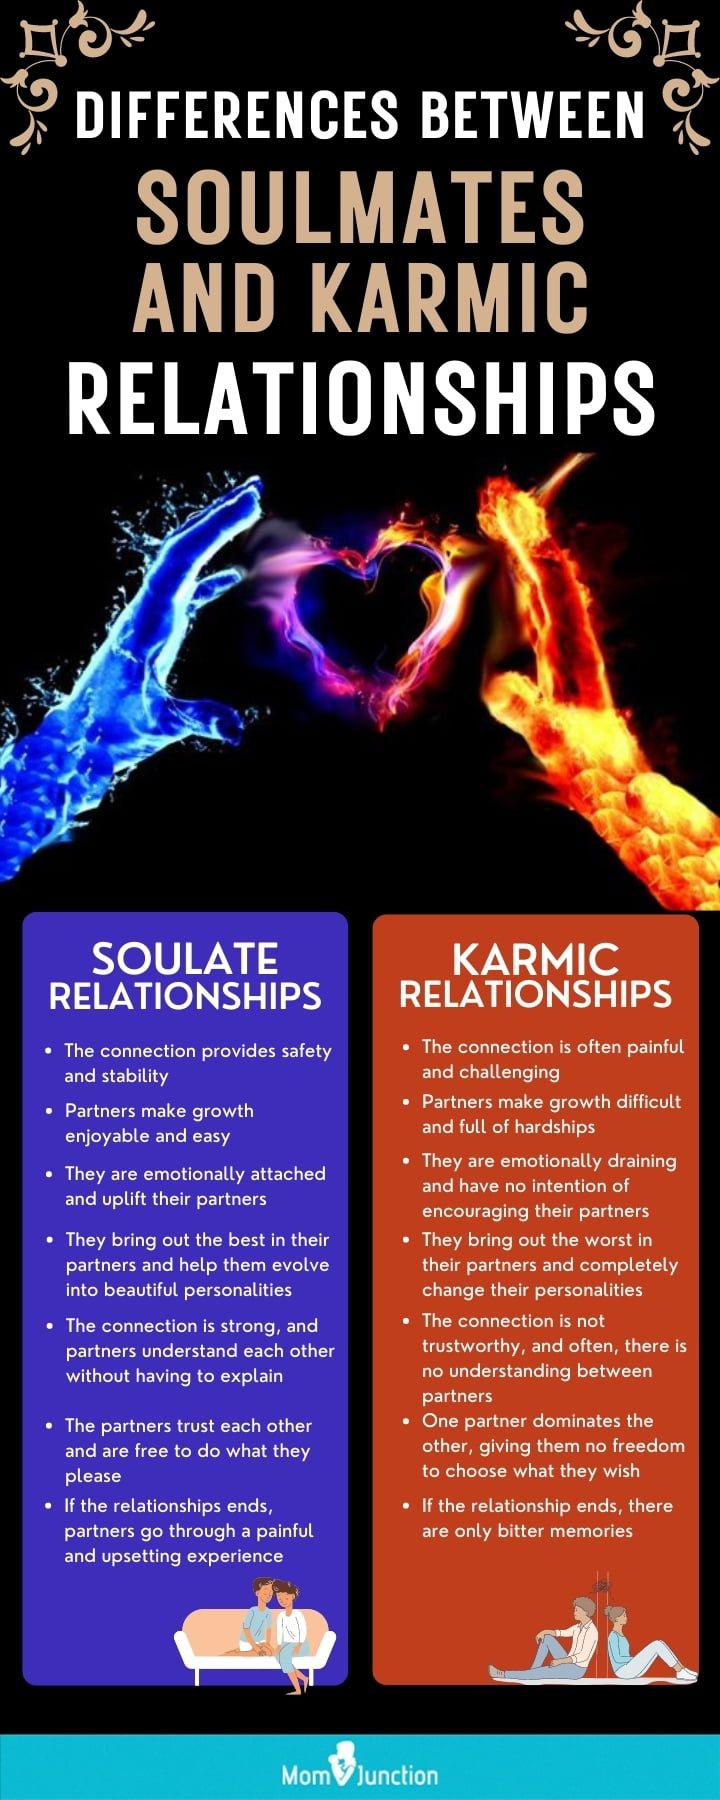 What'S a Karmic Relationship